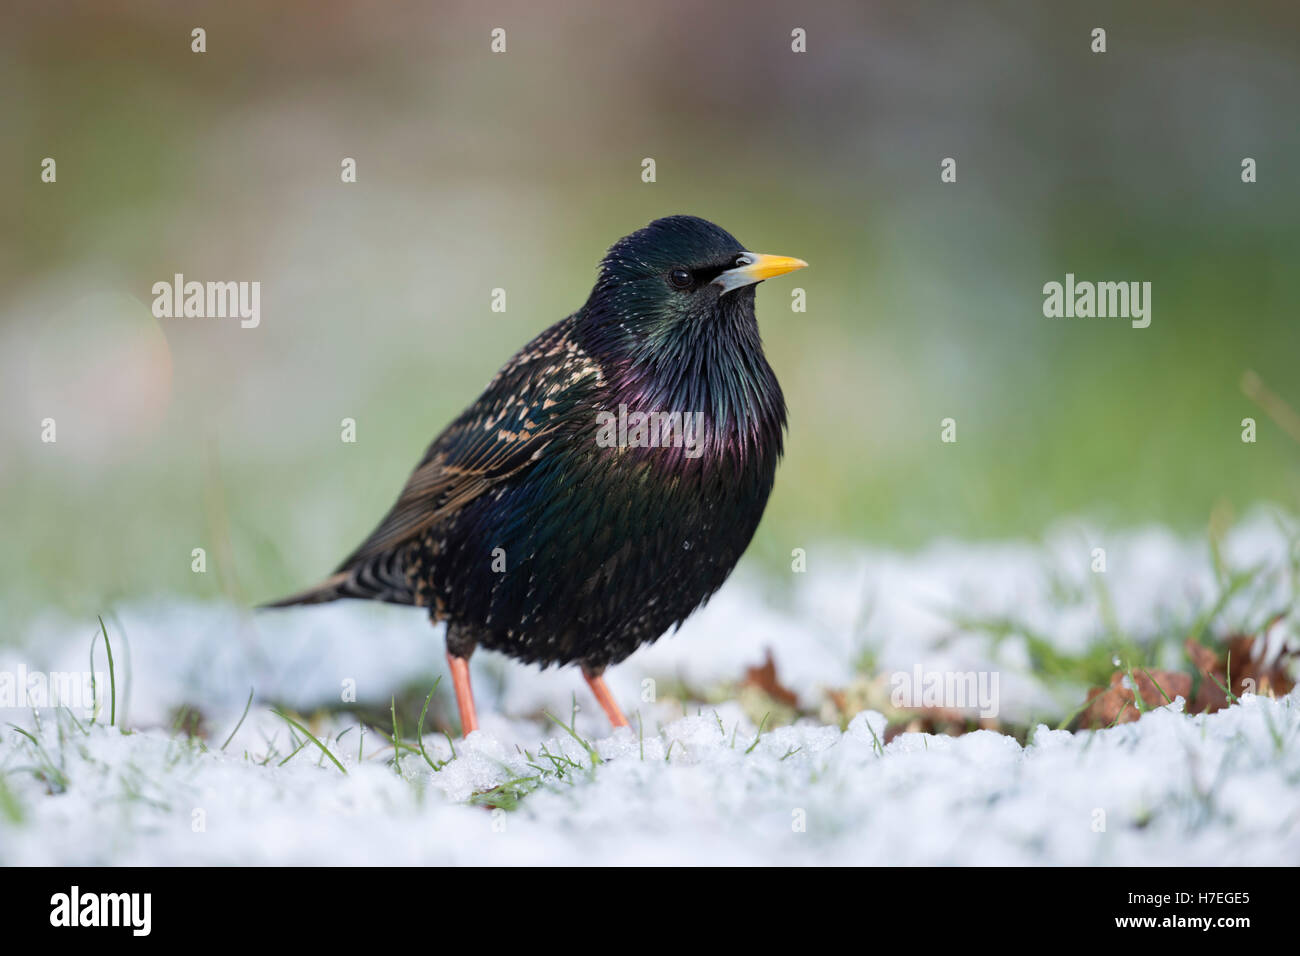 Common Starling ( Sturnus vulgaris ) in breeding dress, on snow covered ground, in grass, onset of winter, watching attentively. Stock Photo